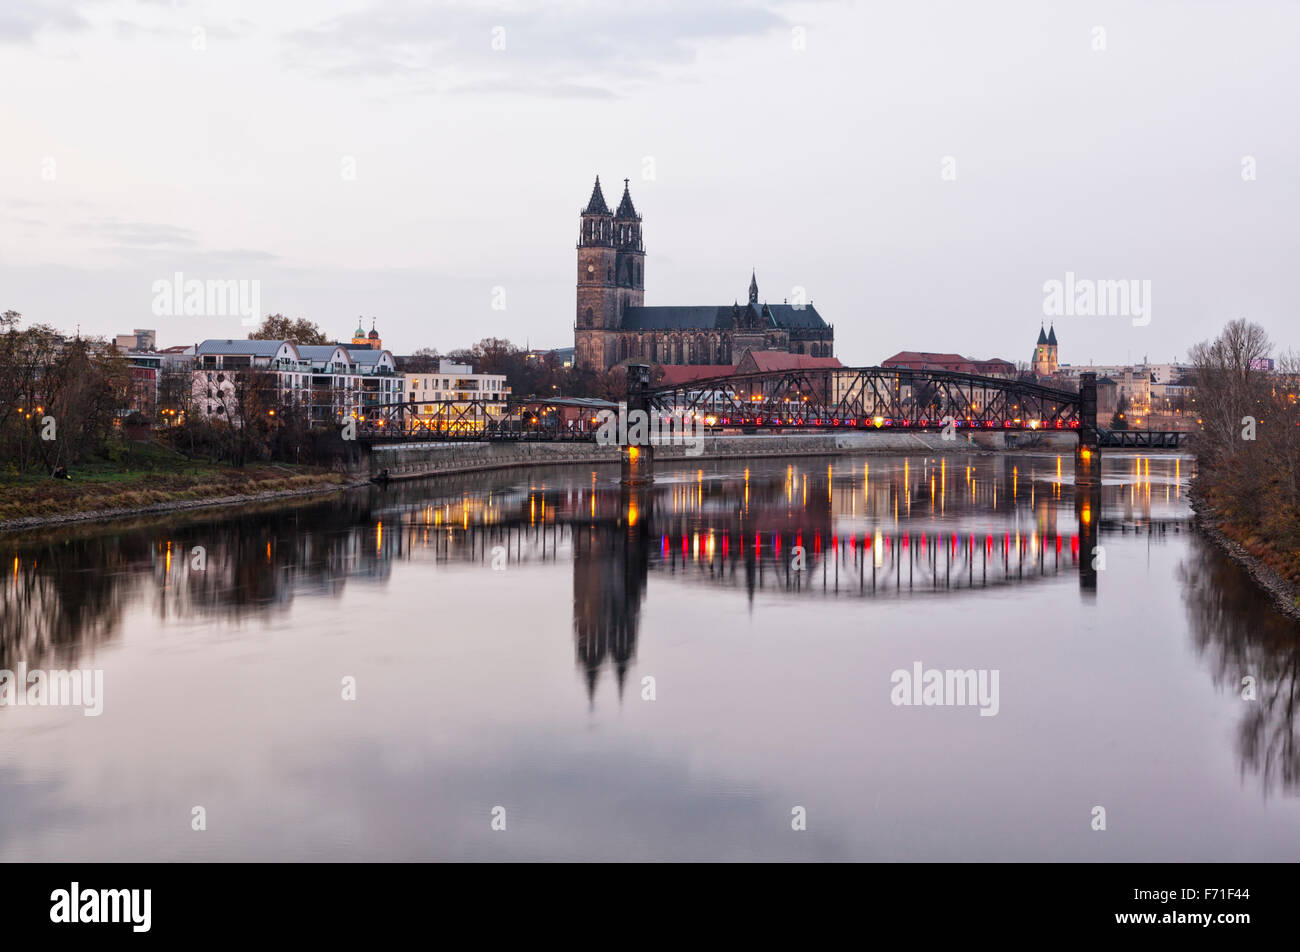 Magdeburg, cathedral and historic vertical-lift bridge across the Elbe river at dusk Stock Photo